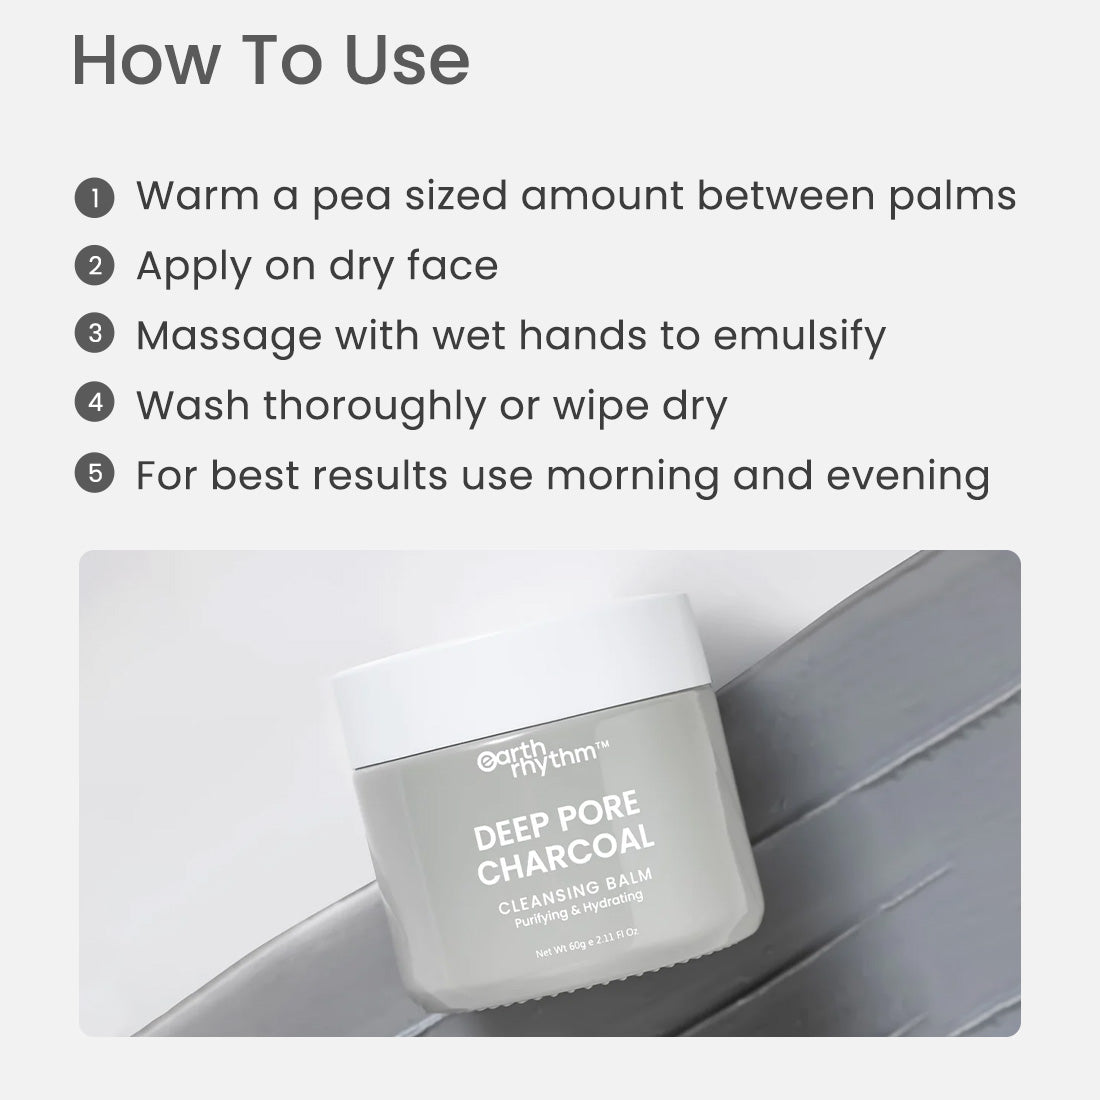 DEEP PORE CHARCOAL CLEANSING BALM